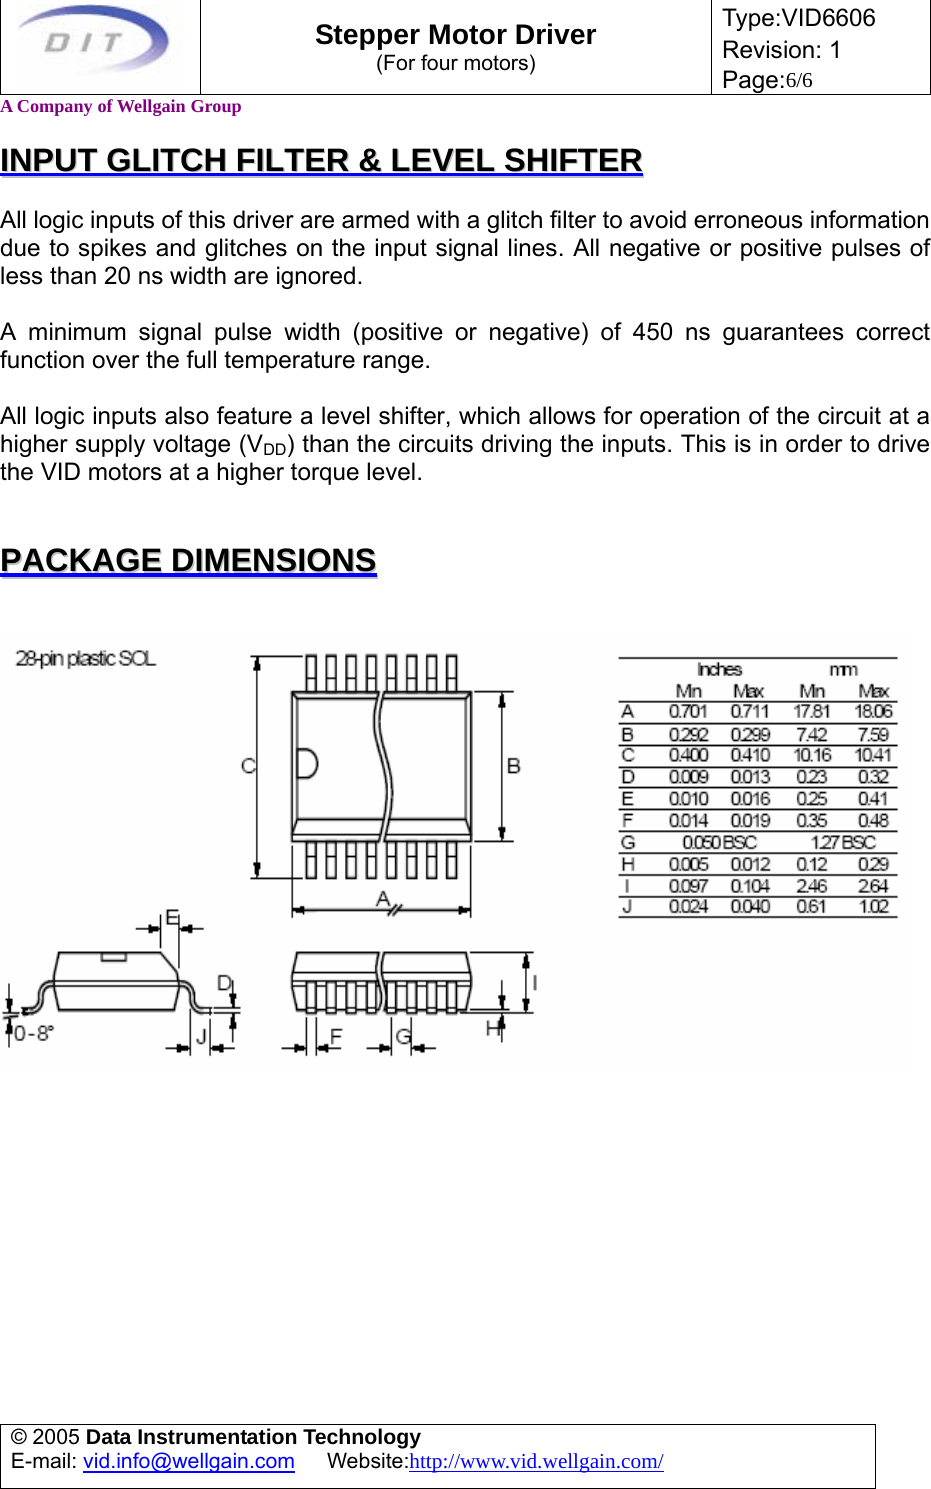 Page 6 of 6 - VID6606 Manual 060809 Stepper Motor Driver